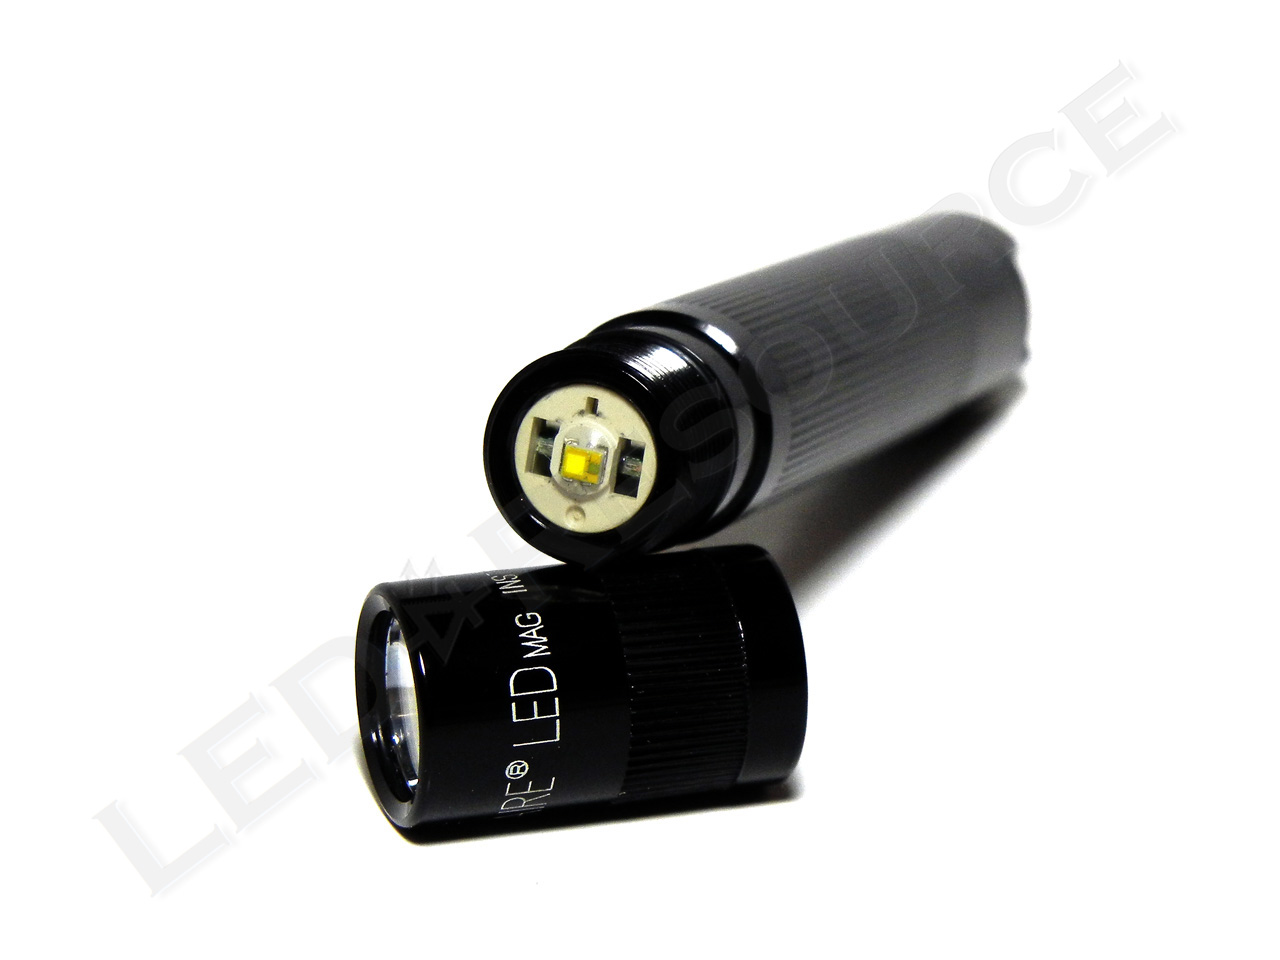 Maglite Solitaire LED Flashlight Review -